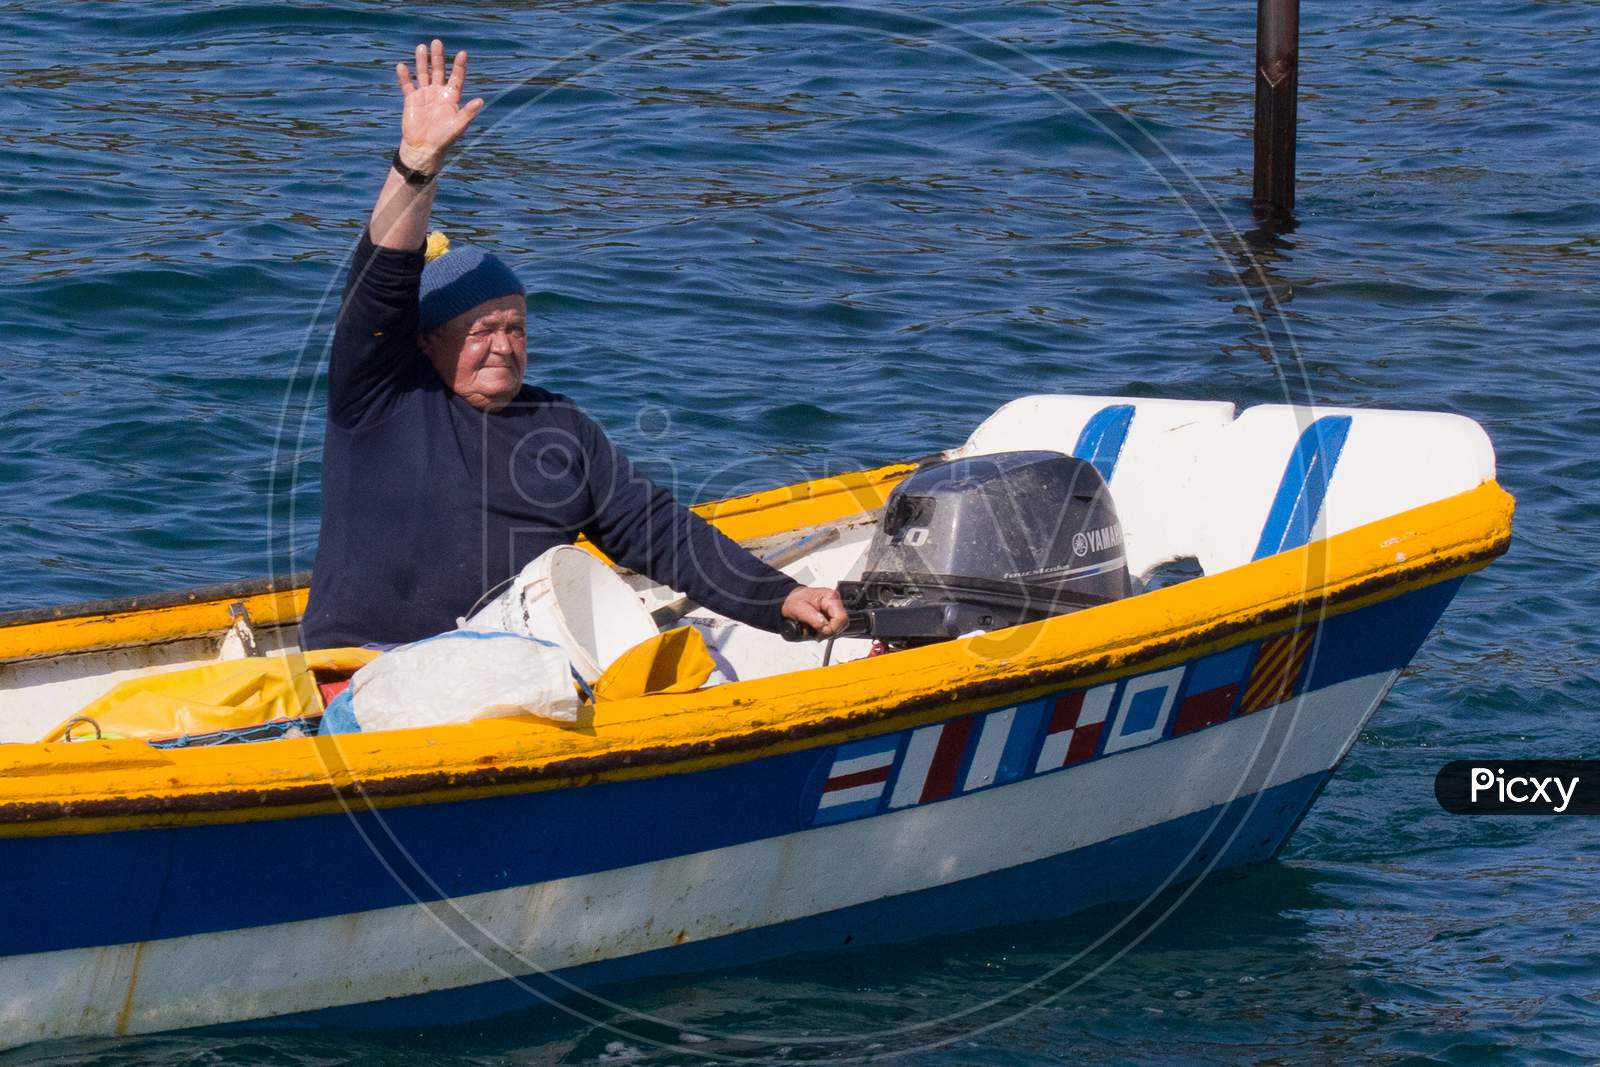 An Old Man Driving a Motor Boat in Chausey, Normandy, France